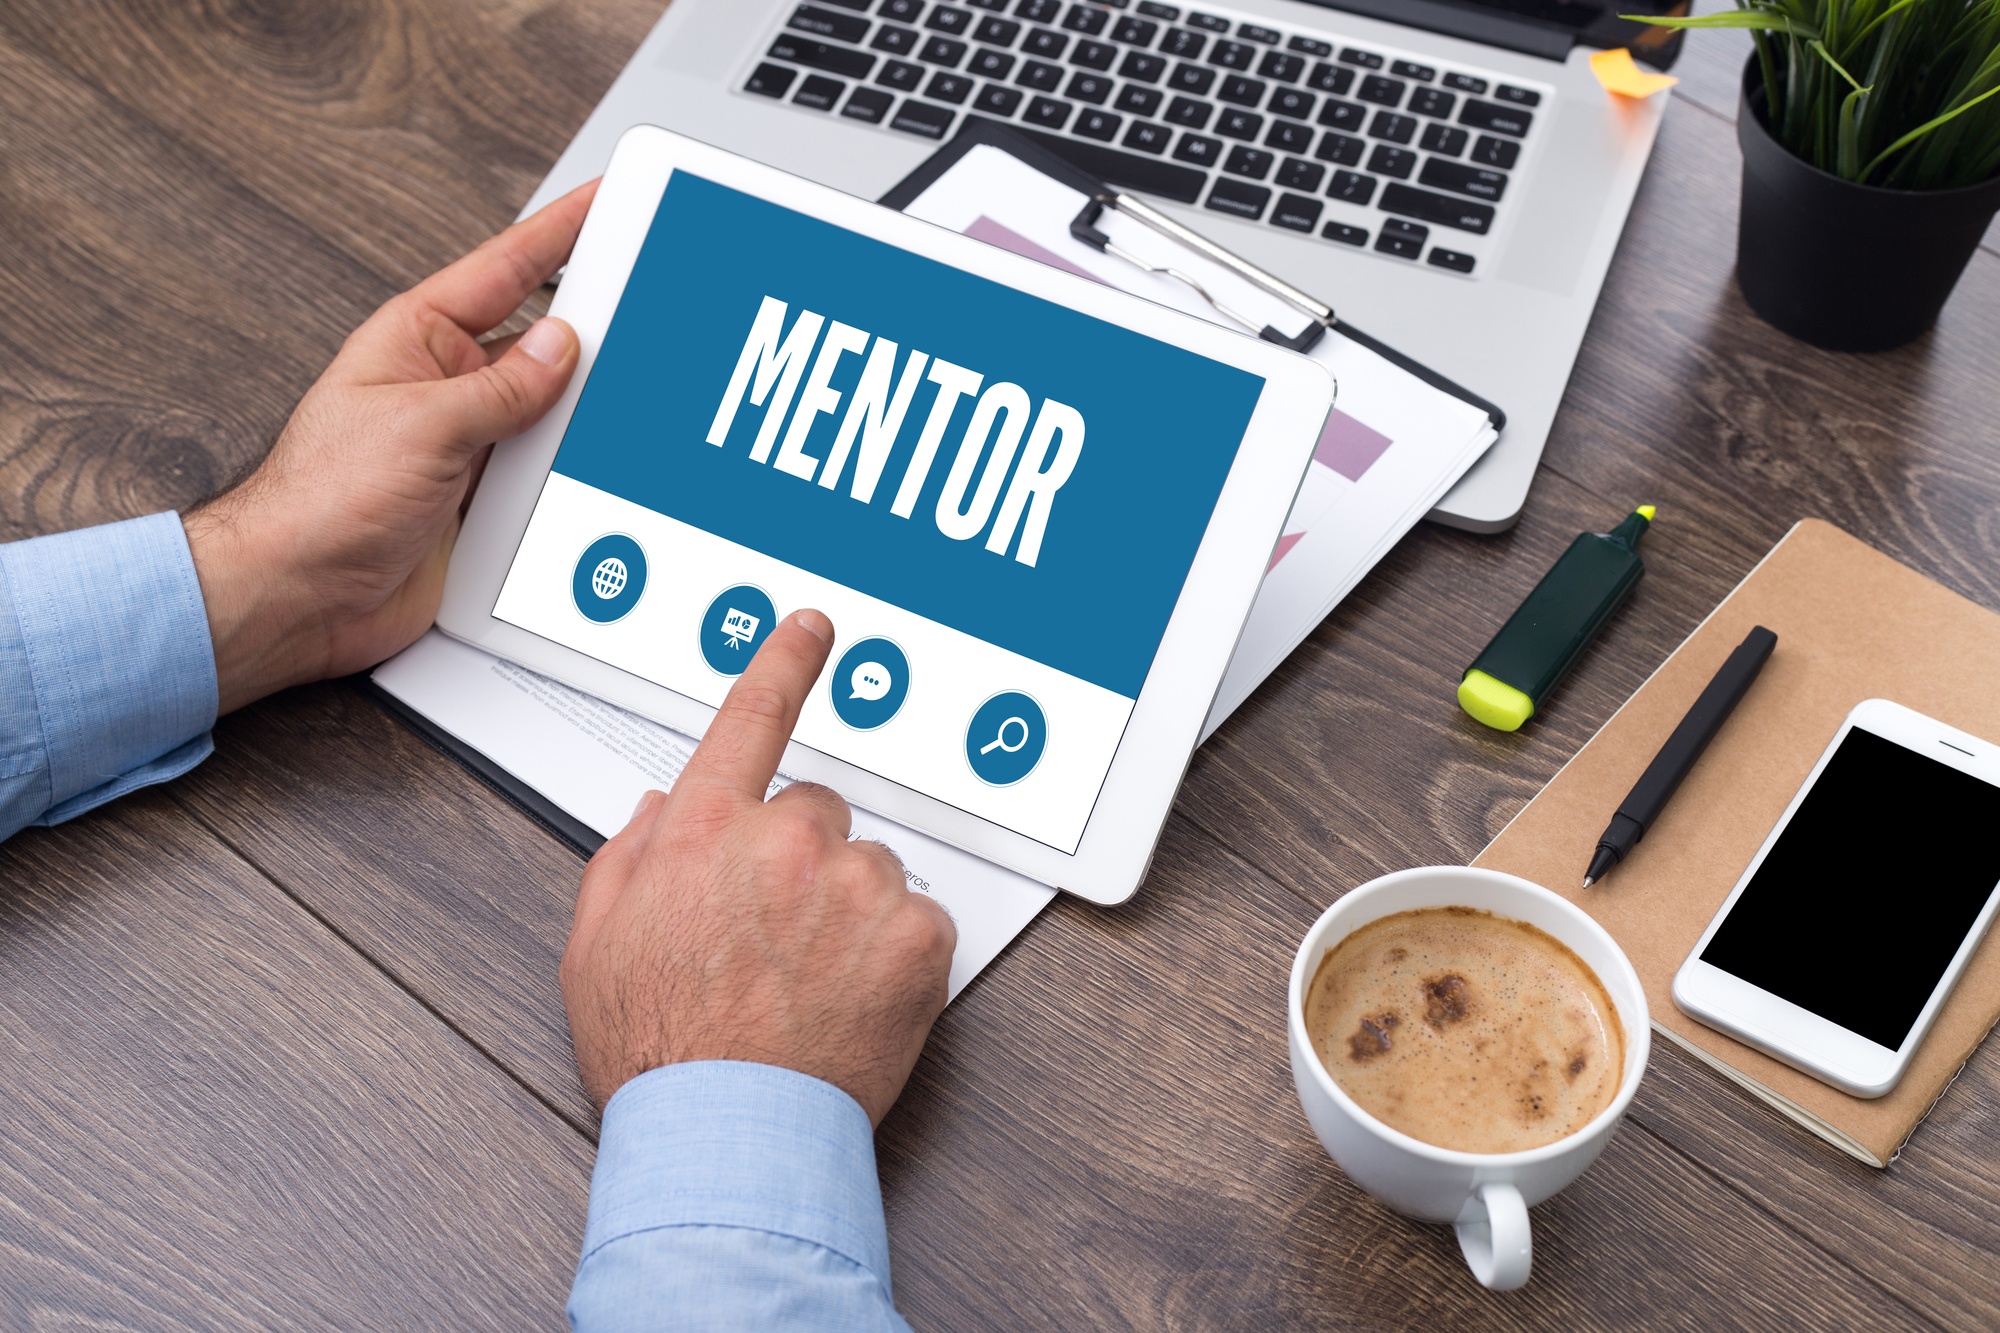 How To Choose a Mentor